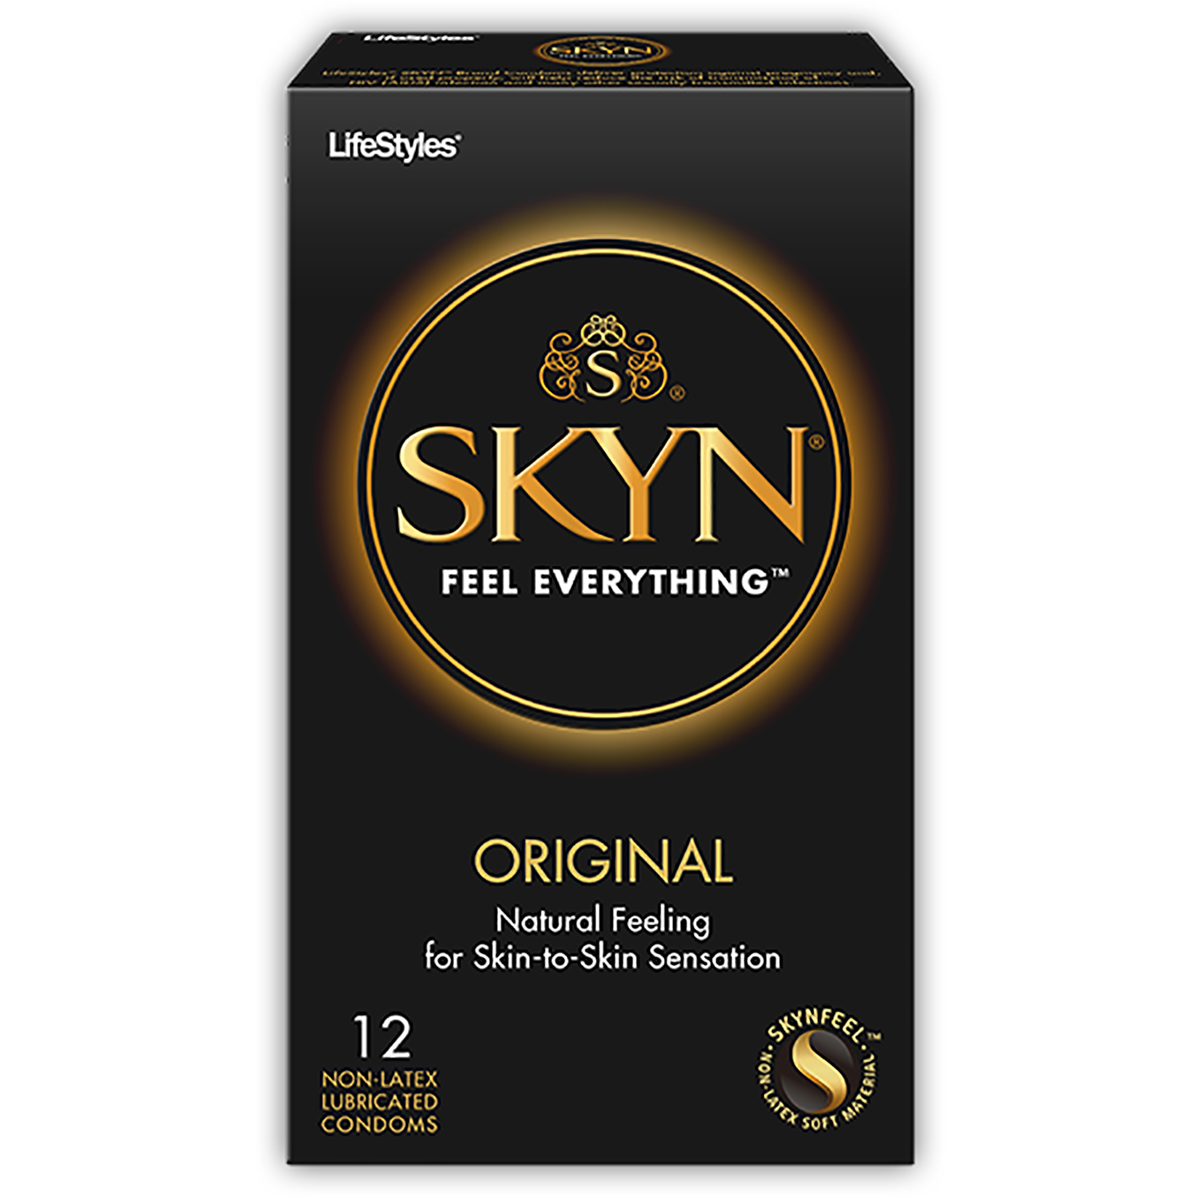 Skyn is well known for their non-latex, heat conducting, feels-just-like-skin condoms. Try them and see...